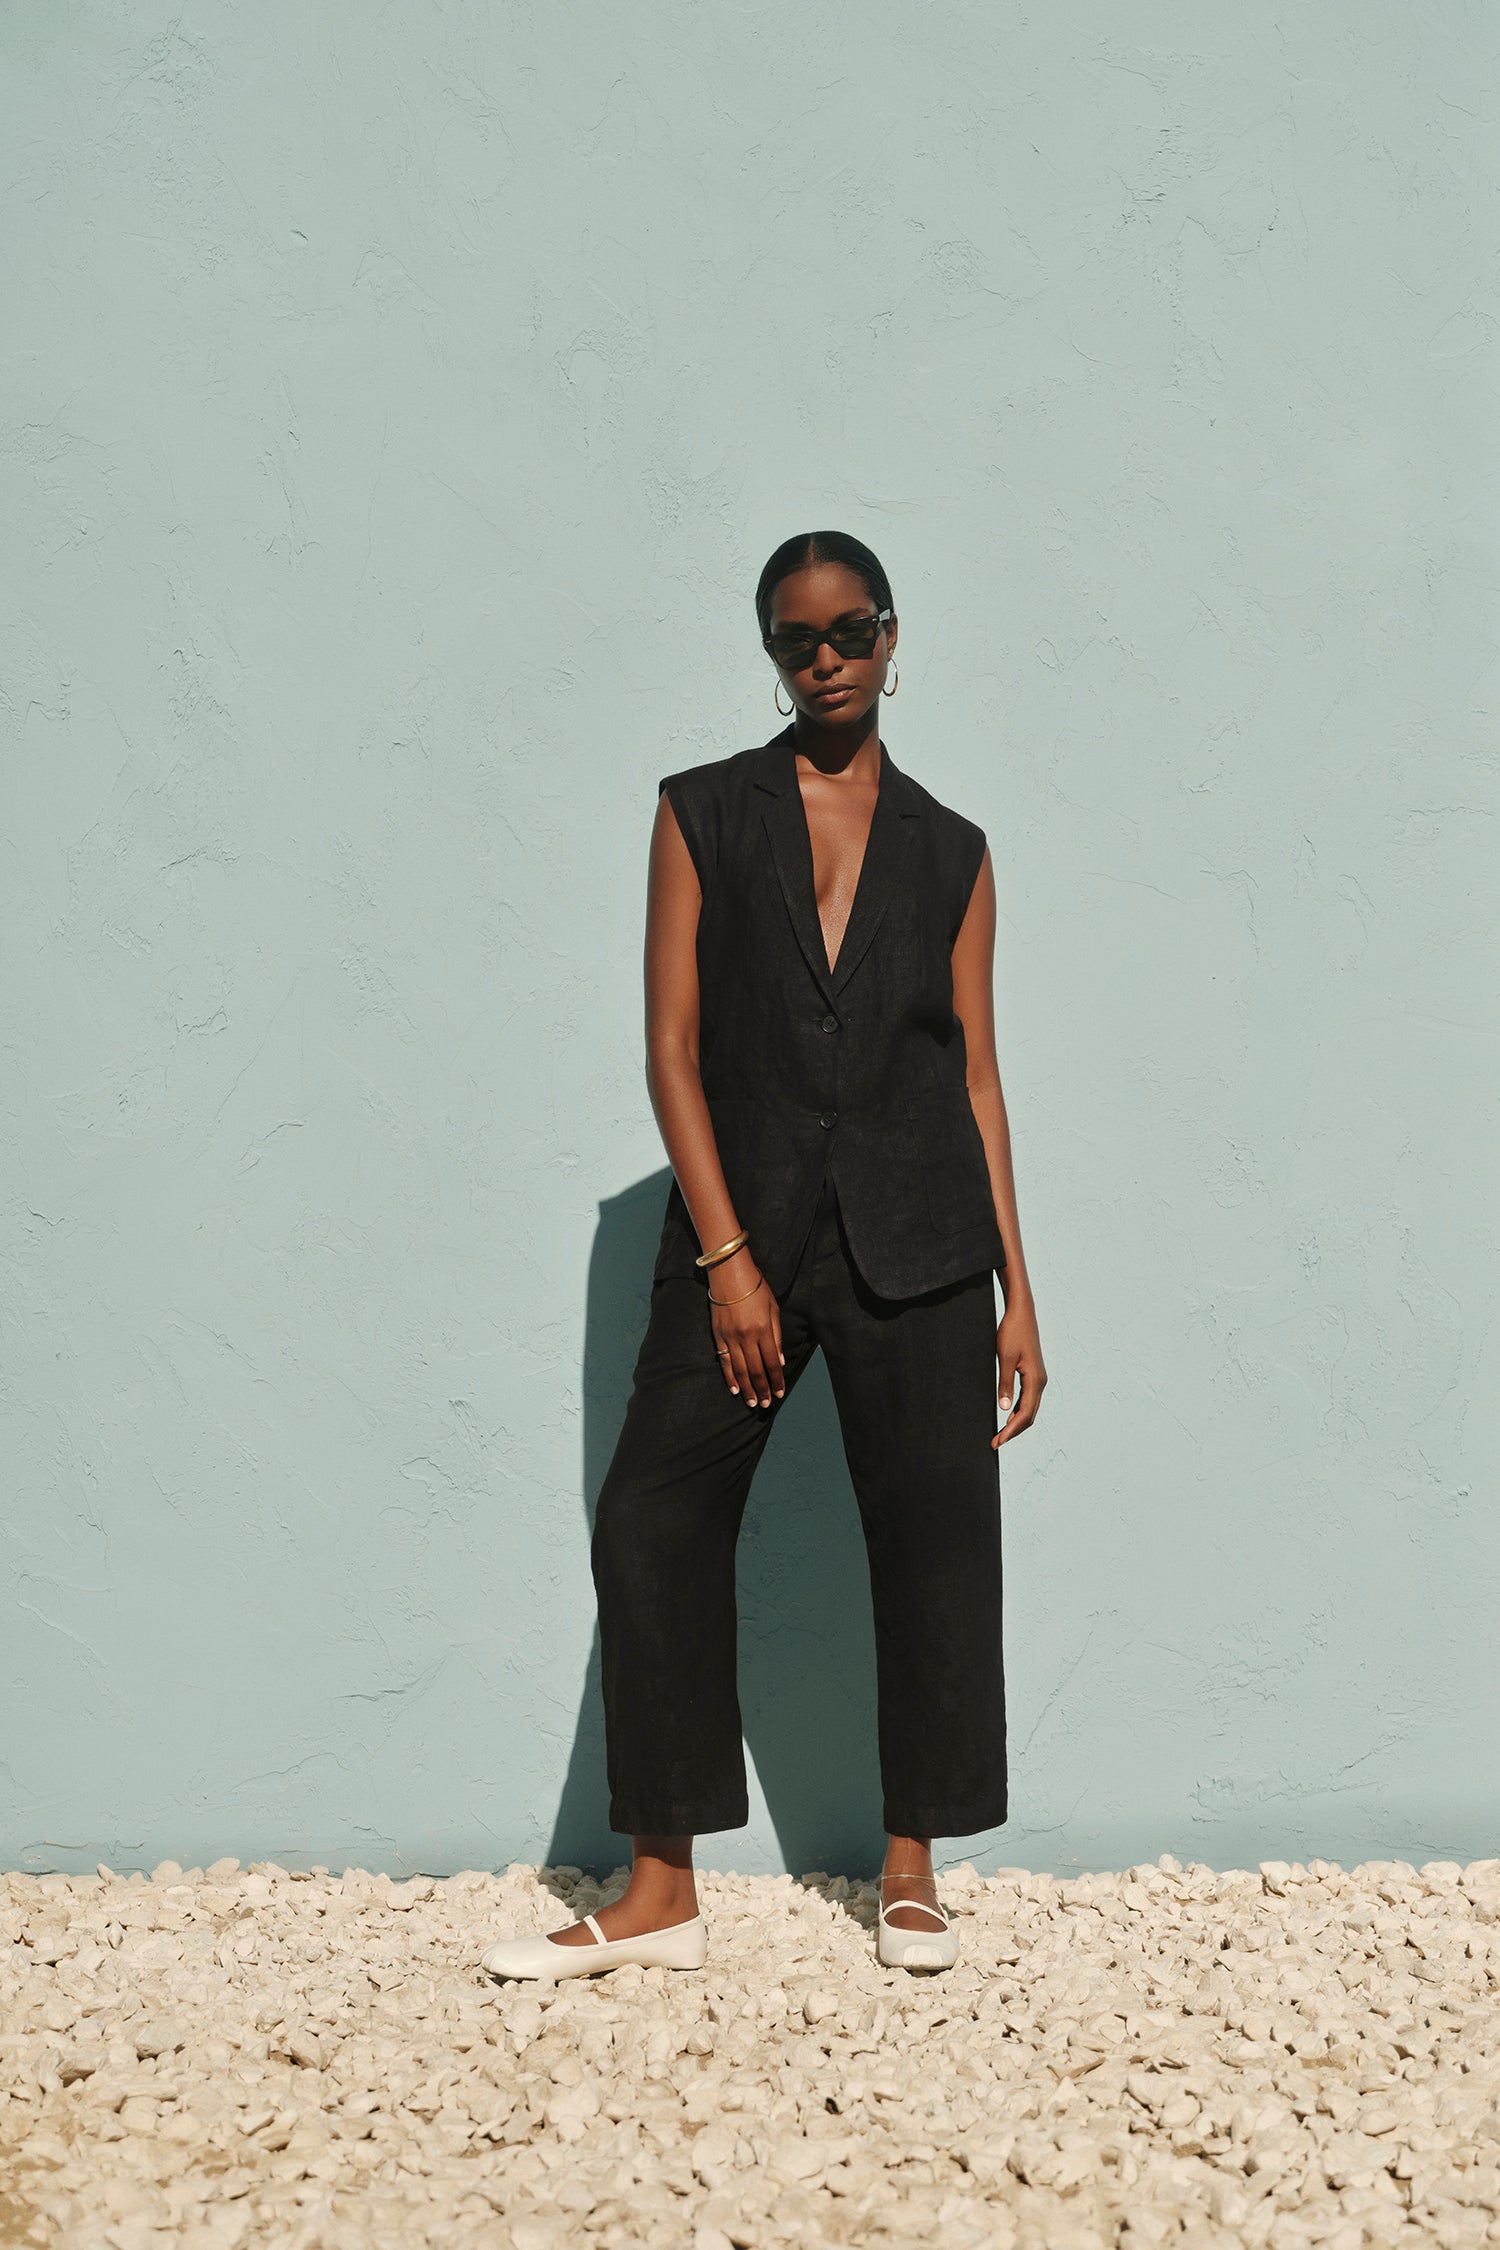   A woman stands confidently against a light blue wall, wearing a Velvet by Graham & Spencer BETHAN HEAVY LINEN SLEEVELESS BLAZER and sunglasses, with her hands in pockets. 